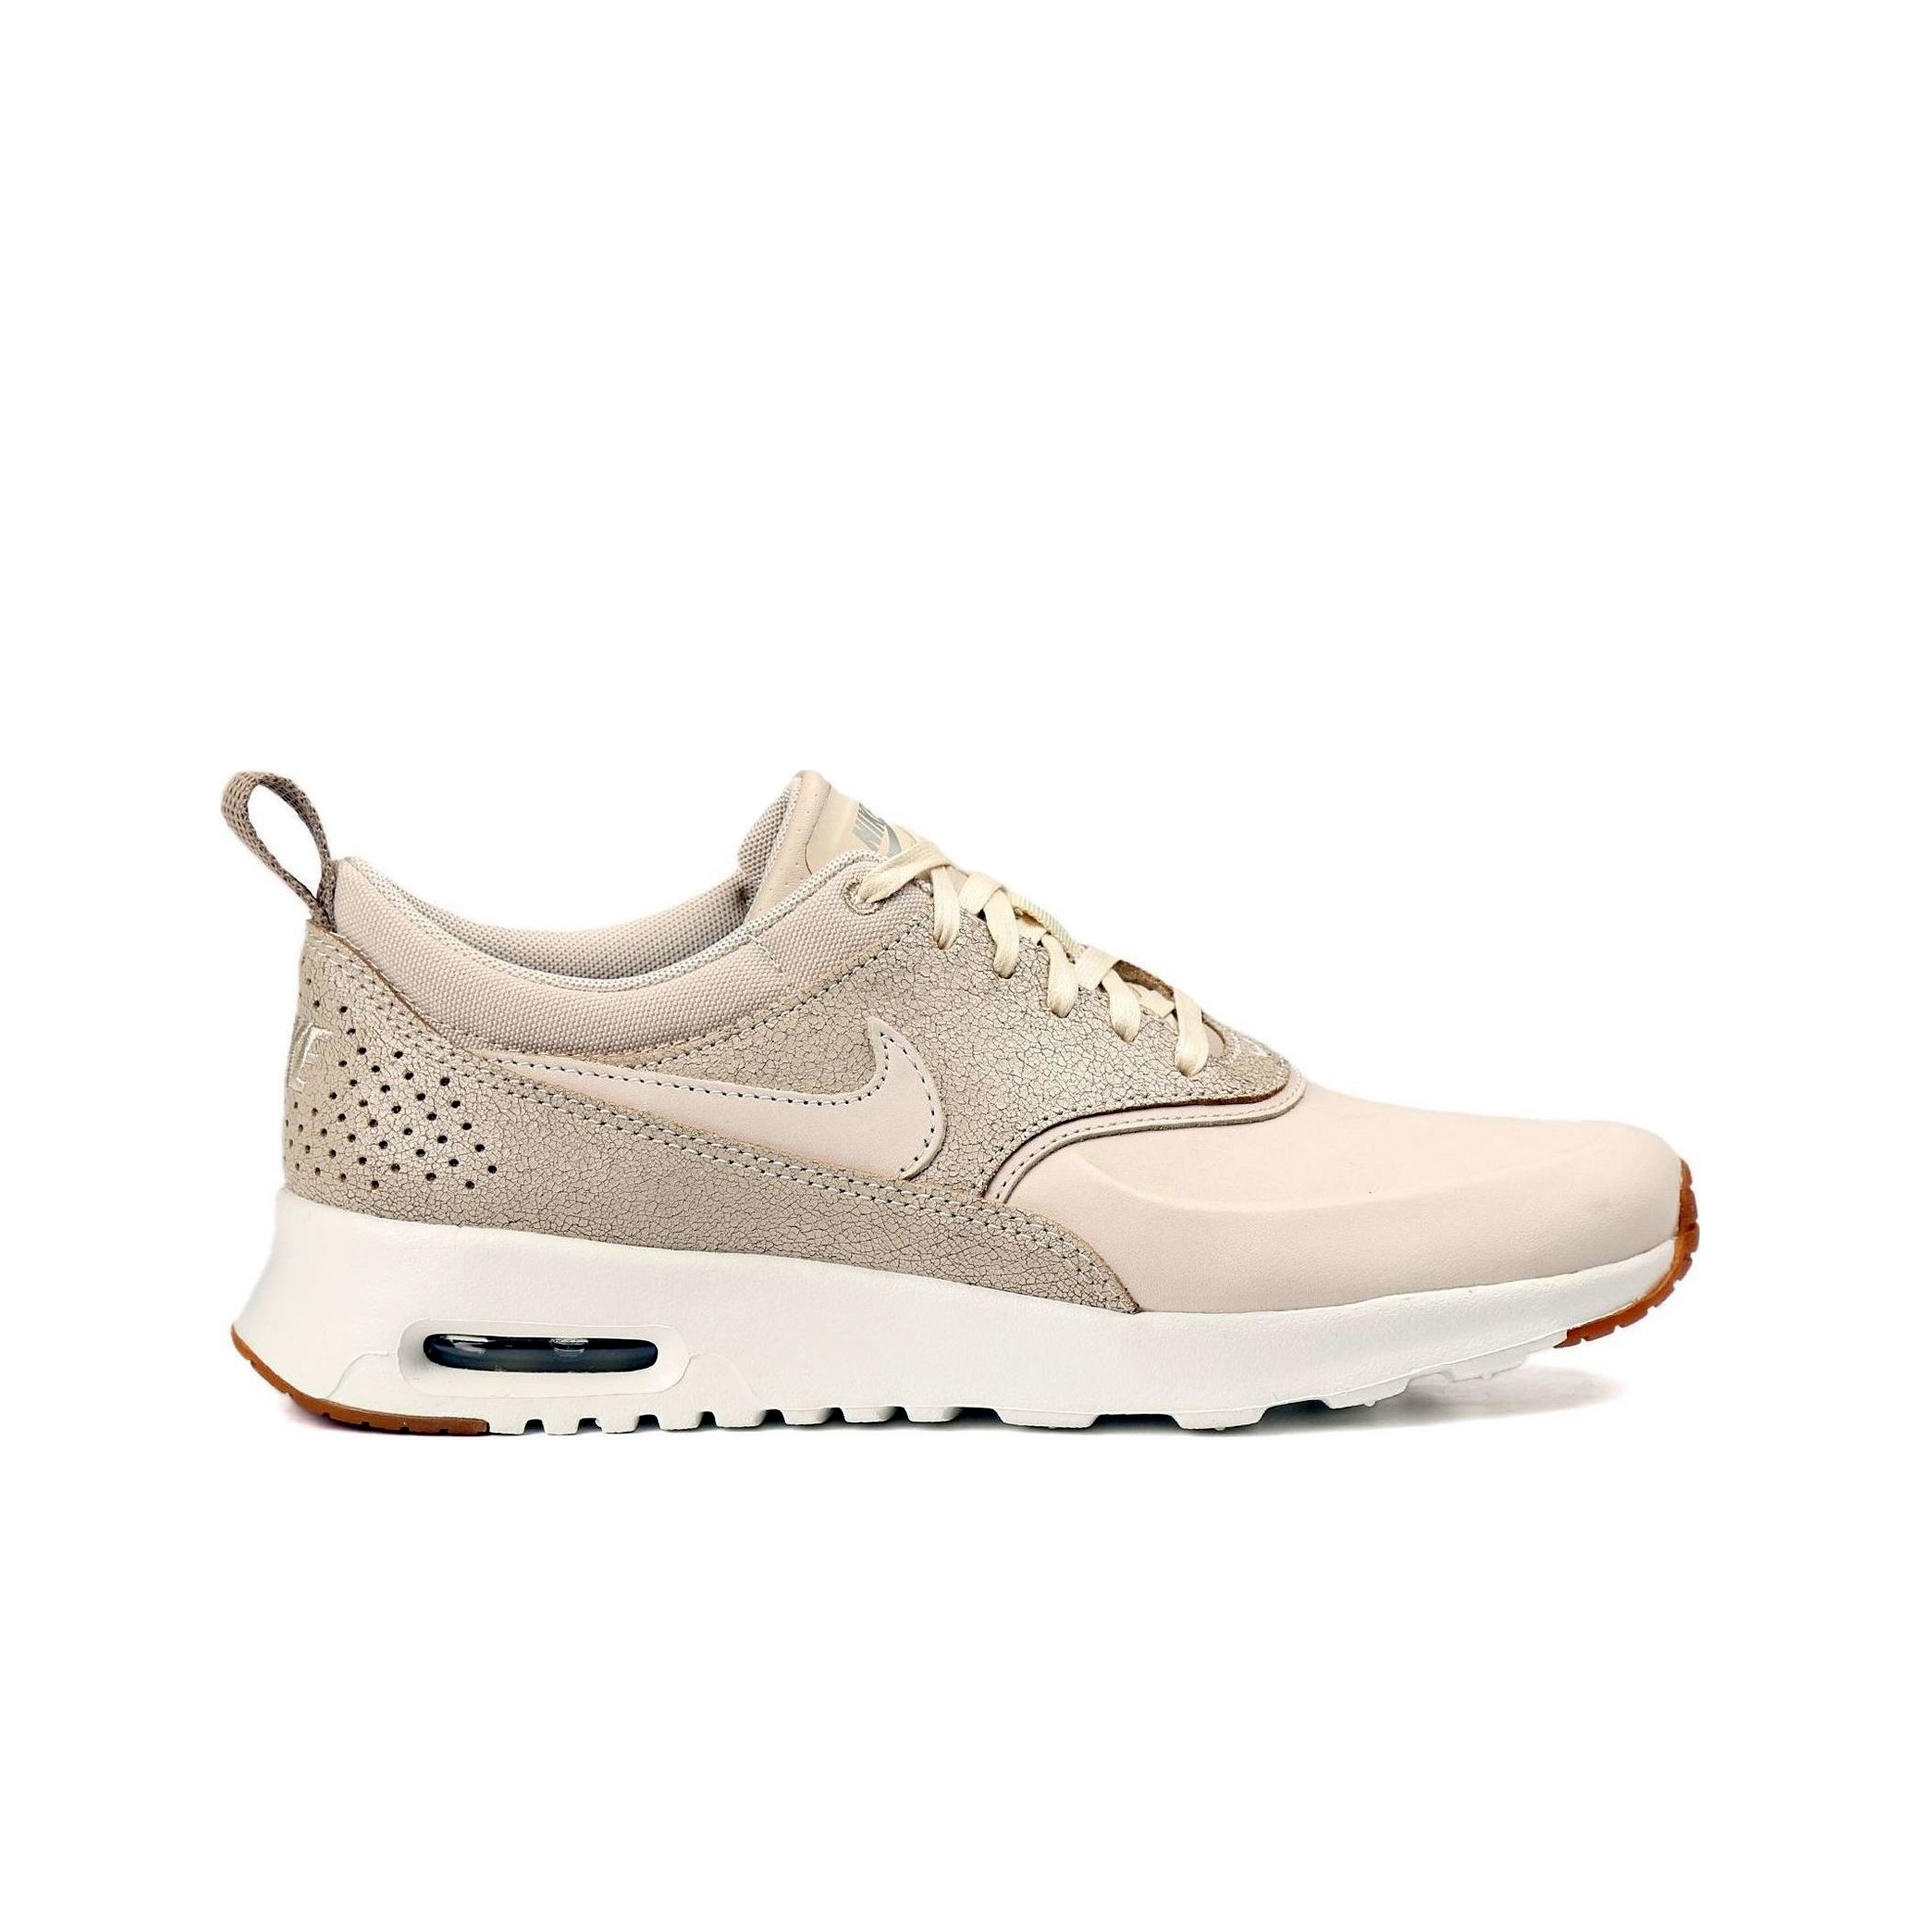 Nike Wmns Nike Air Max Thea Prm beige zapatillas mujer | Dooers